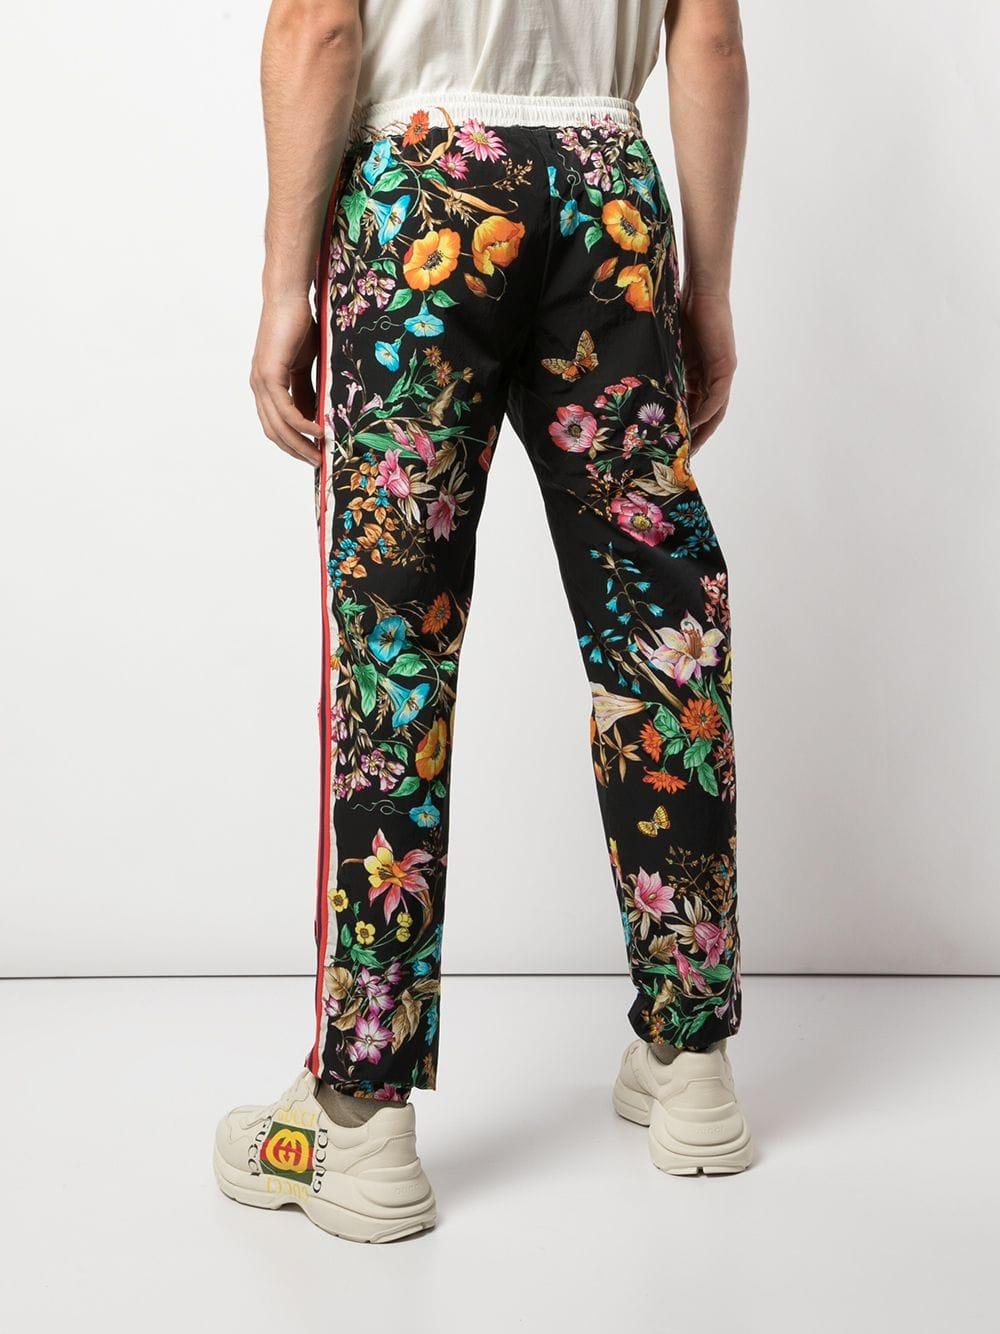 Gucci Floral Print Track Pants in Black for Men - Lyst